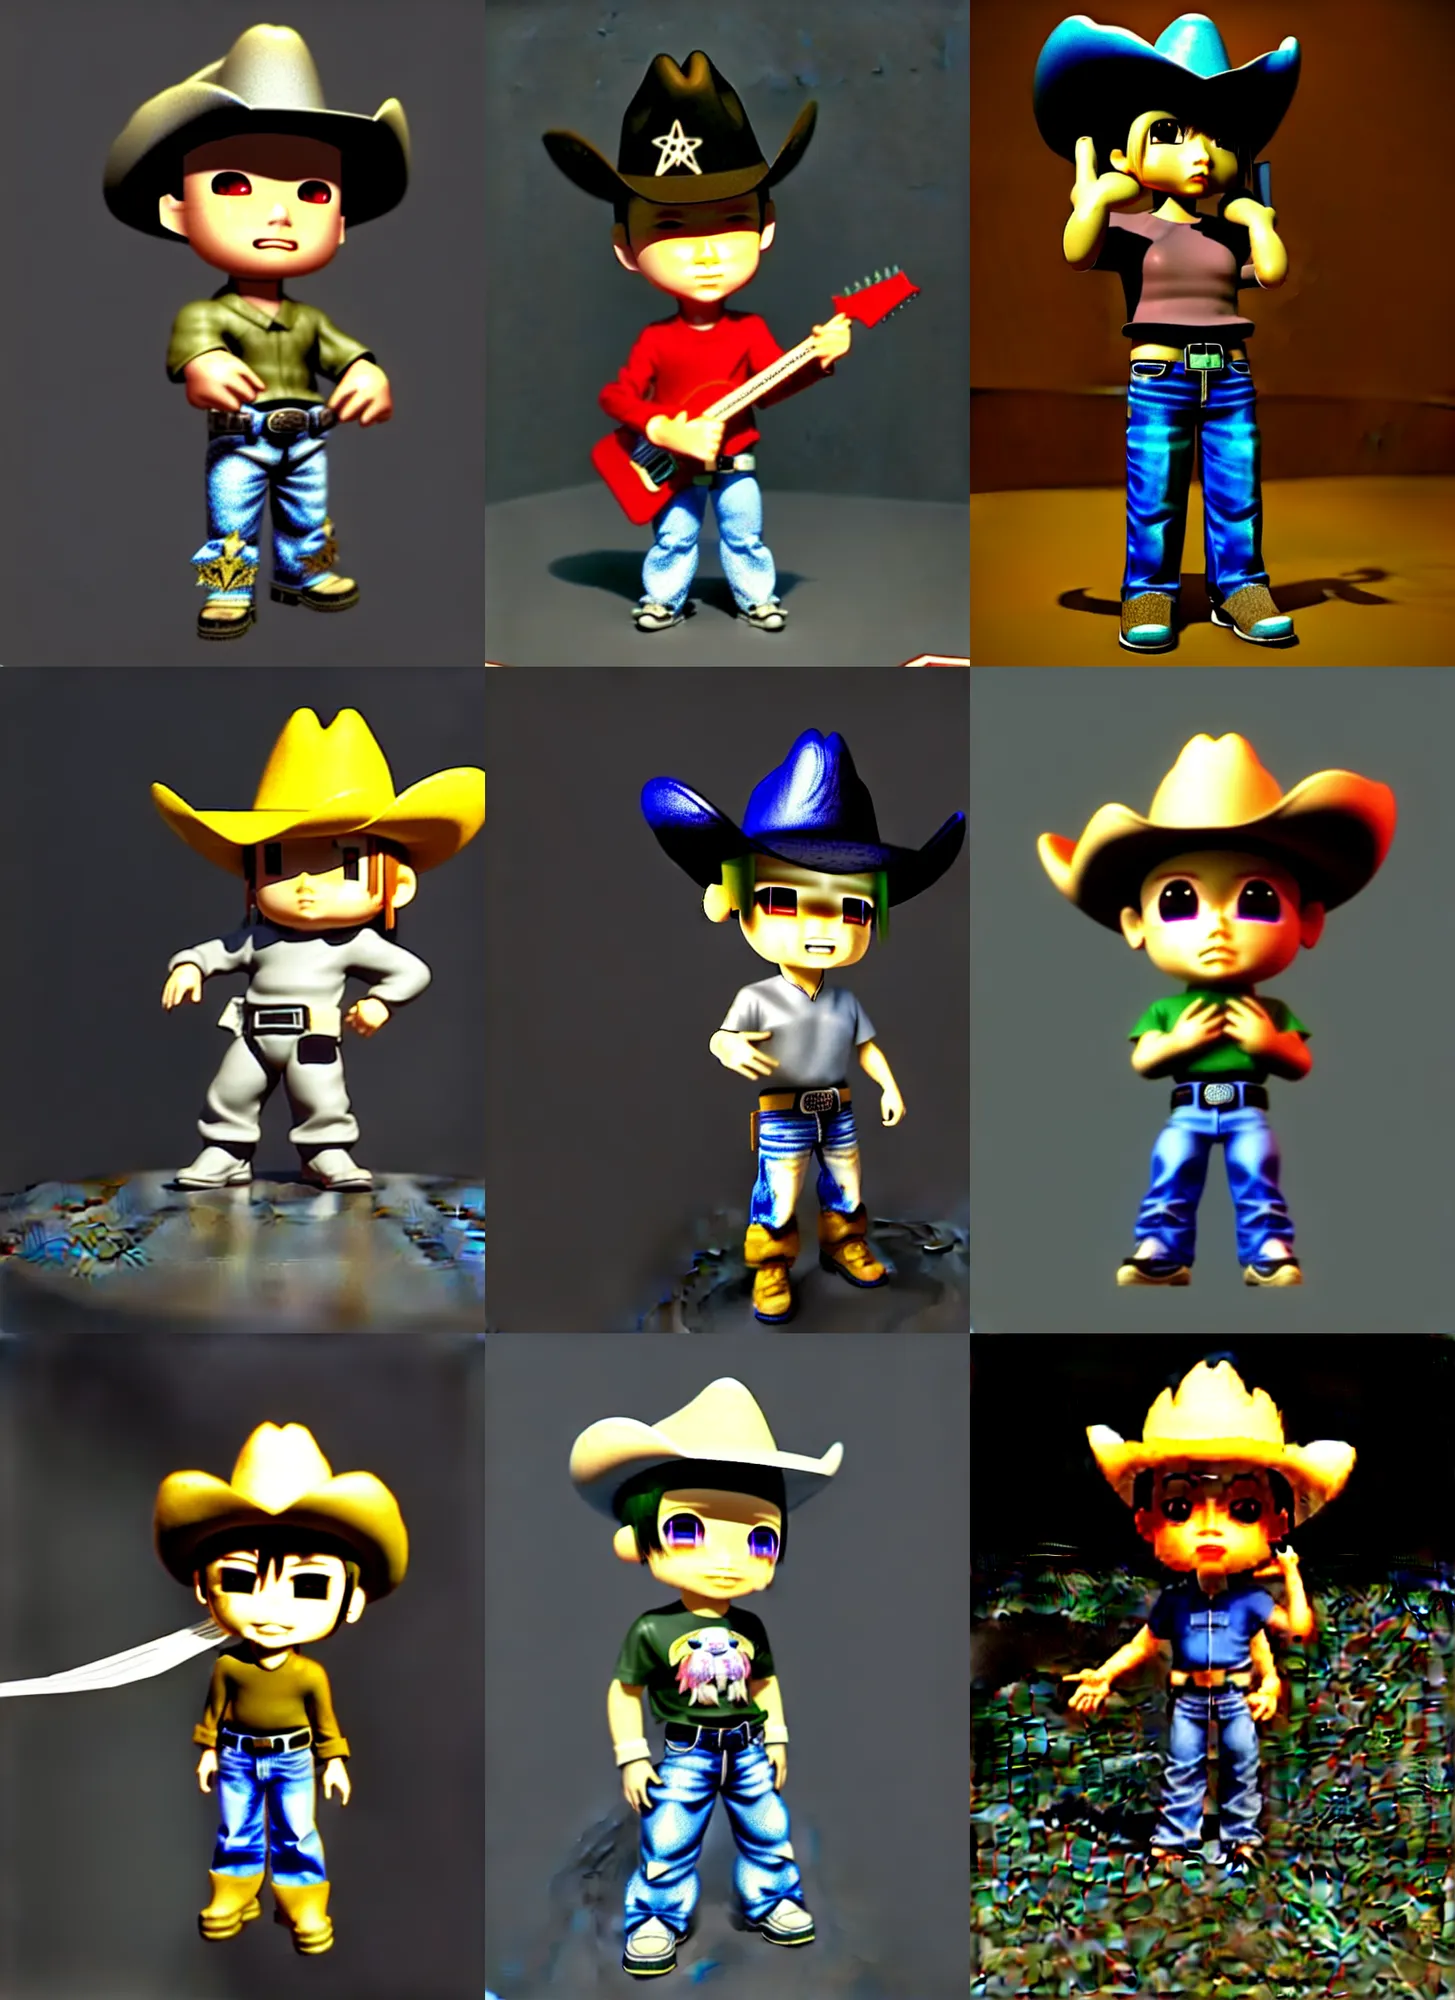 Prompt: 3d render of chibi angel cowboy by Ichiro Tanida in an small 3d rendered room in the style of 1990's CG graphics 3d rendered y2K aesthetic in a dirty dark dark dark poorly lit bedroom full of trash and garbage server racks and cables everywhere Ichiro Tanida, 3DO magazine